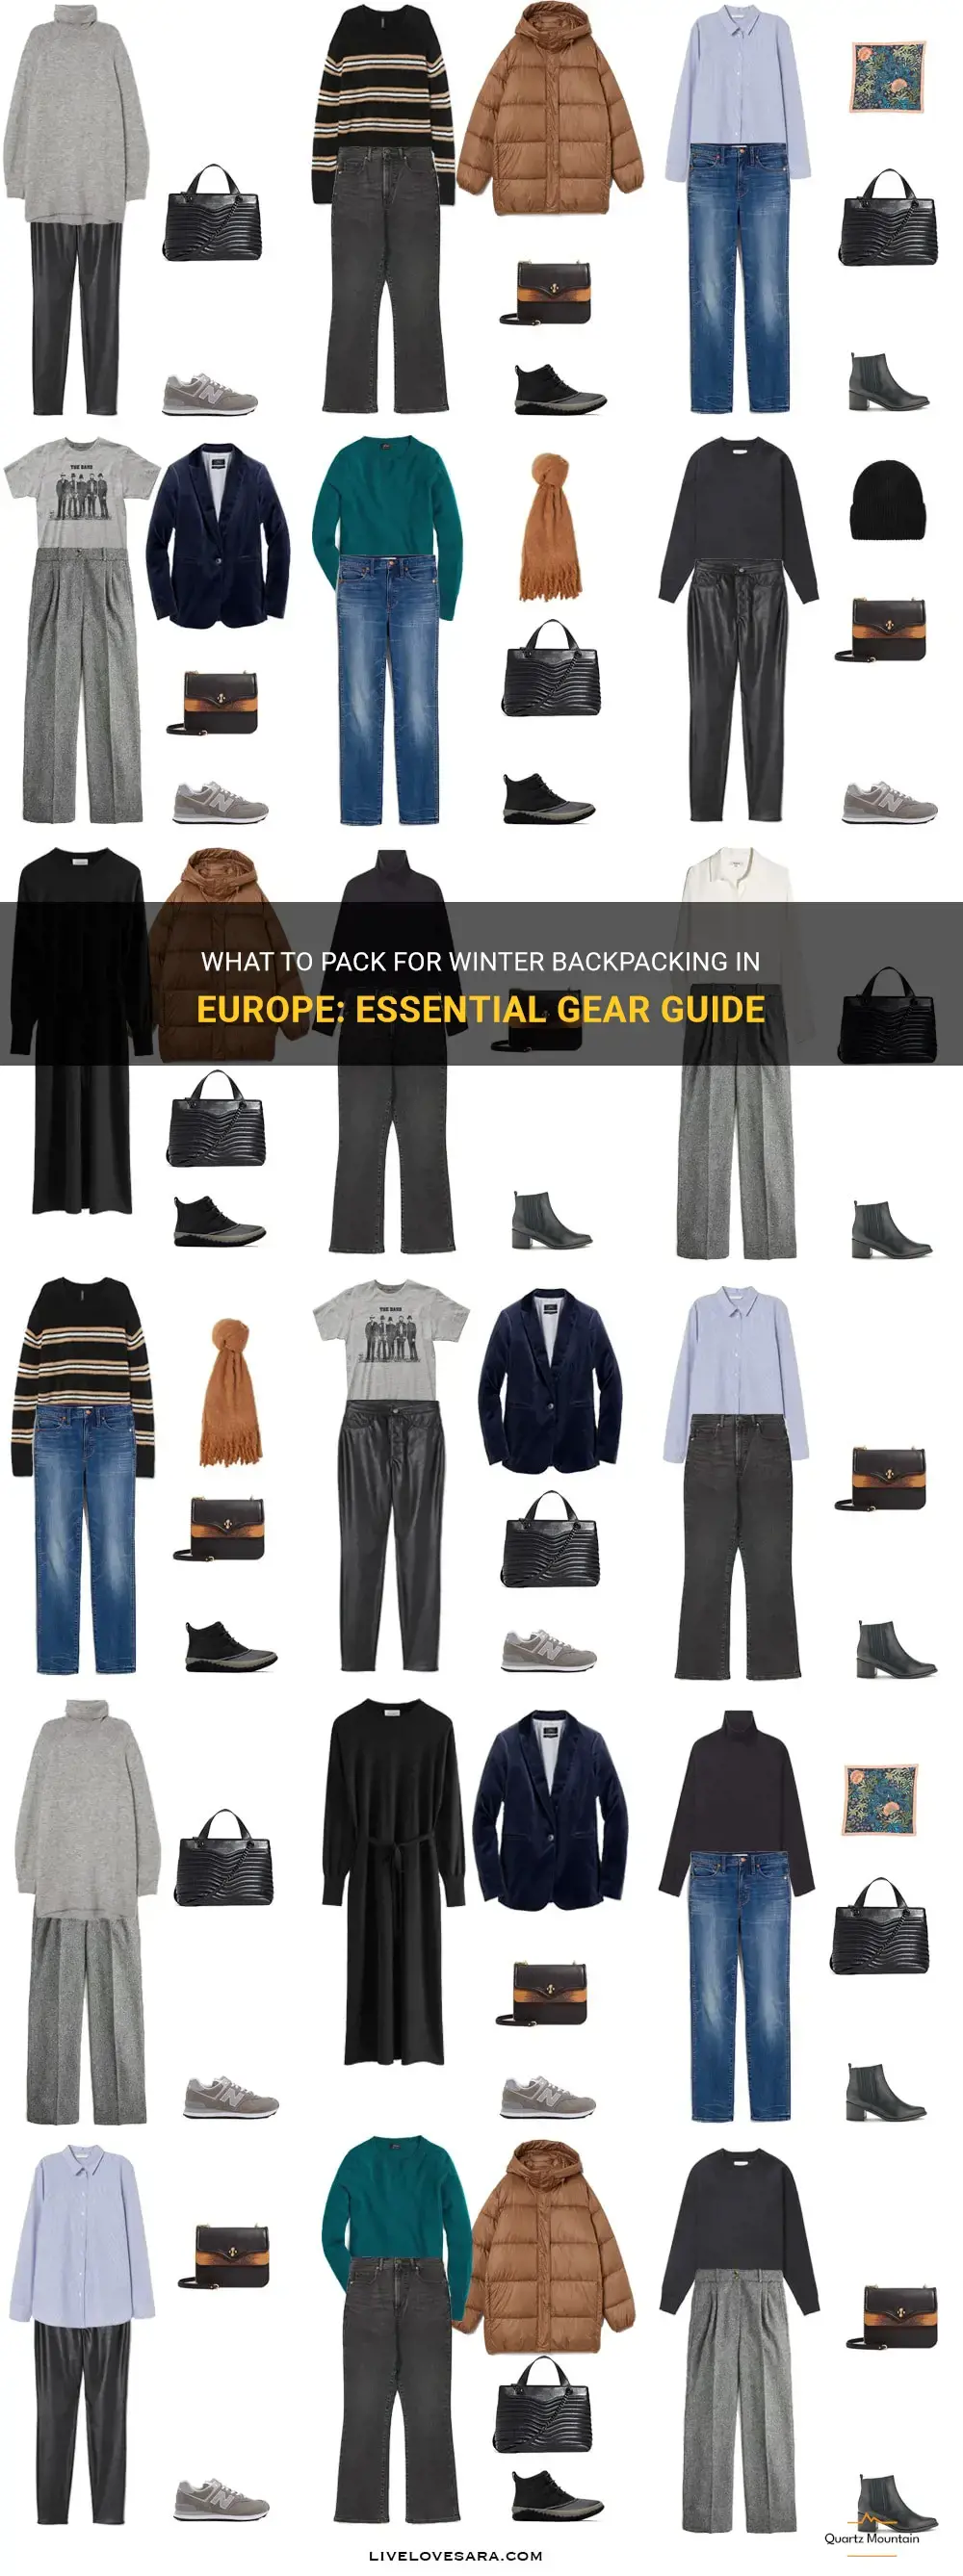 backpacking europe in winter what to pack